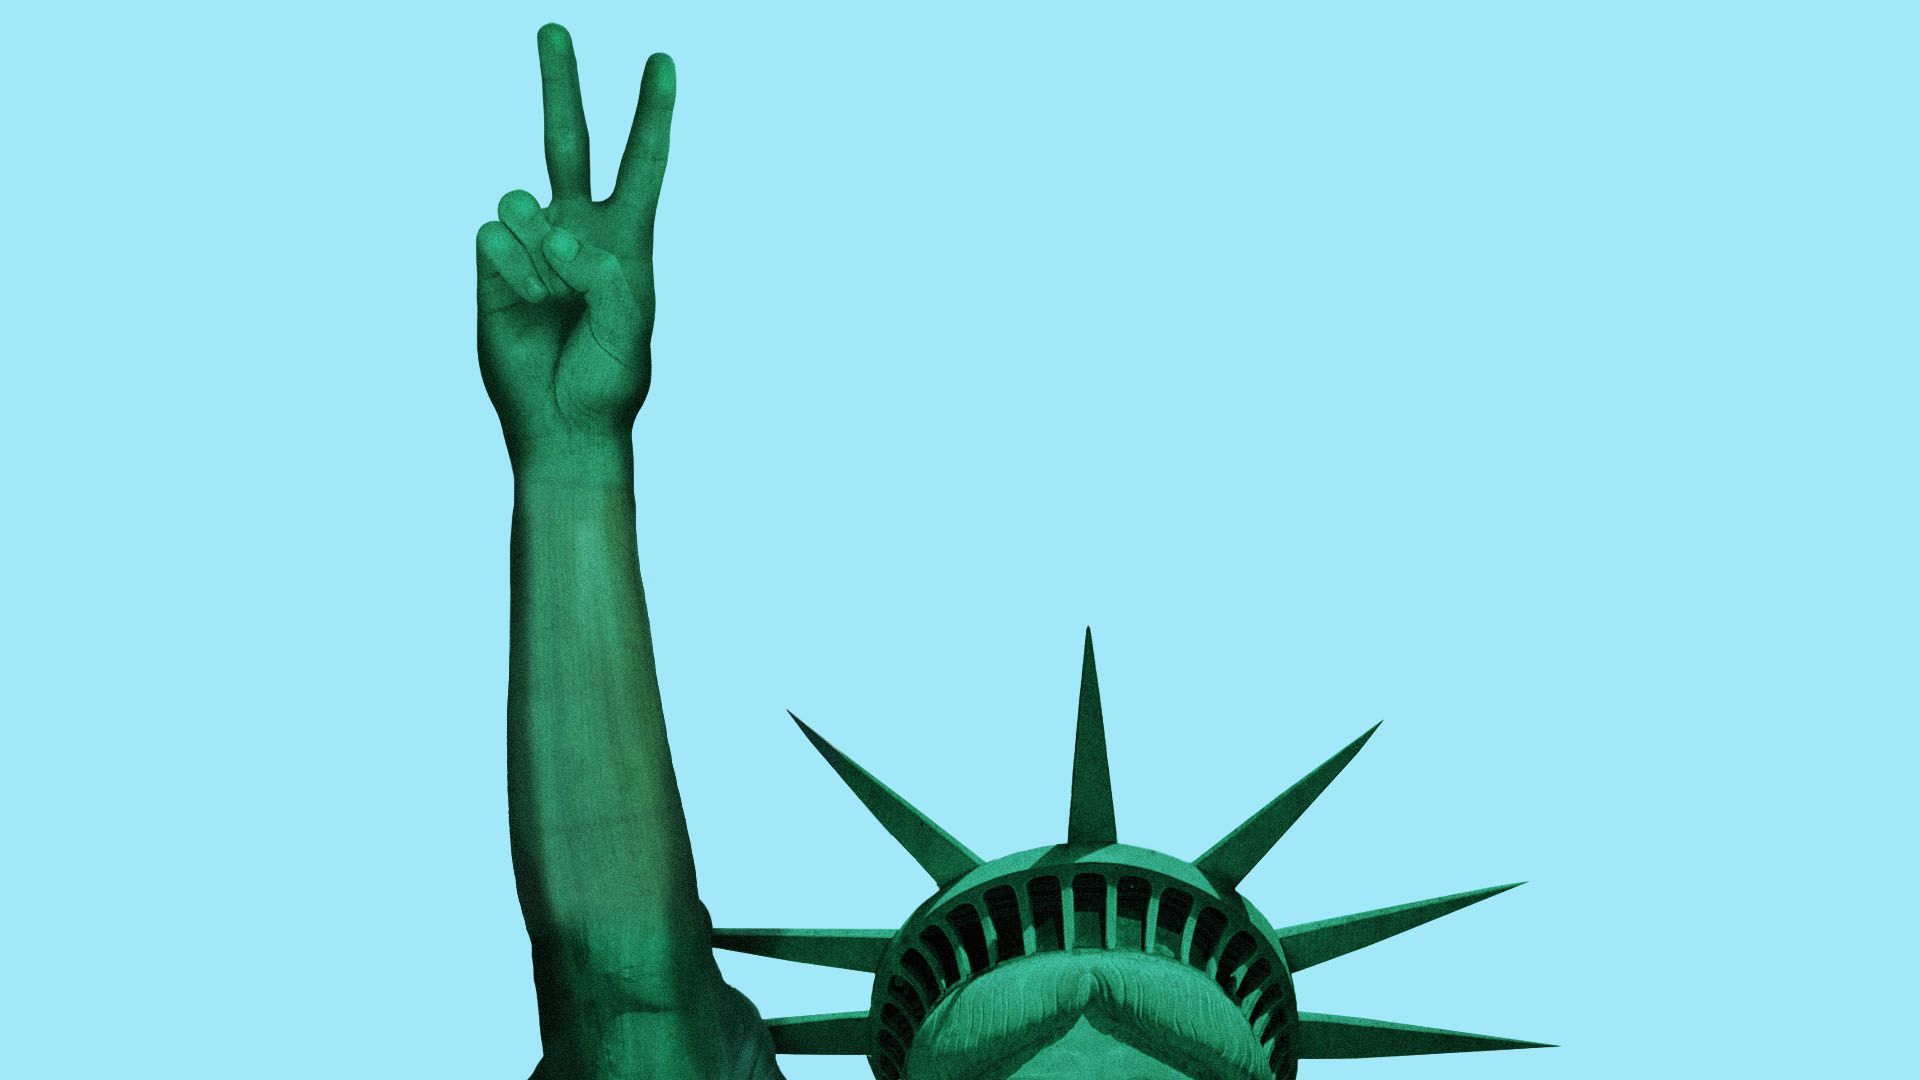 Illustration of the statue of liberty making a victory sign